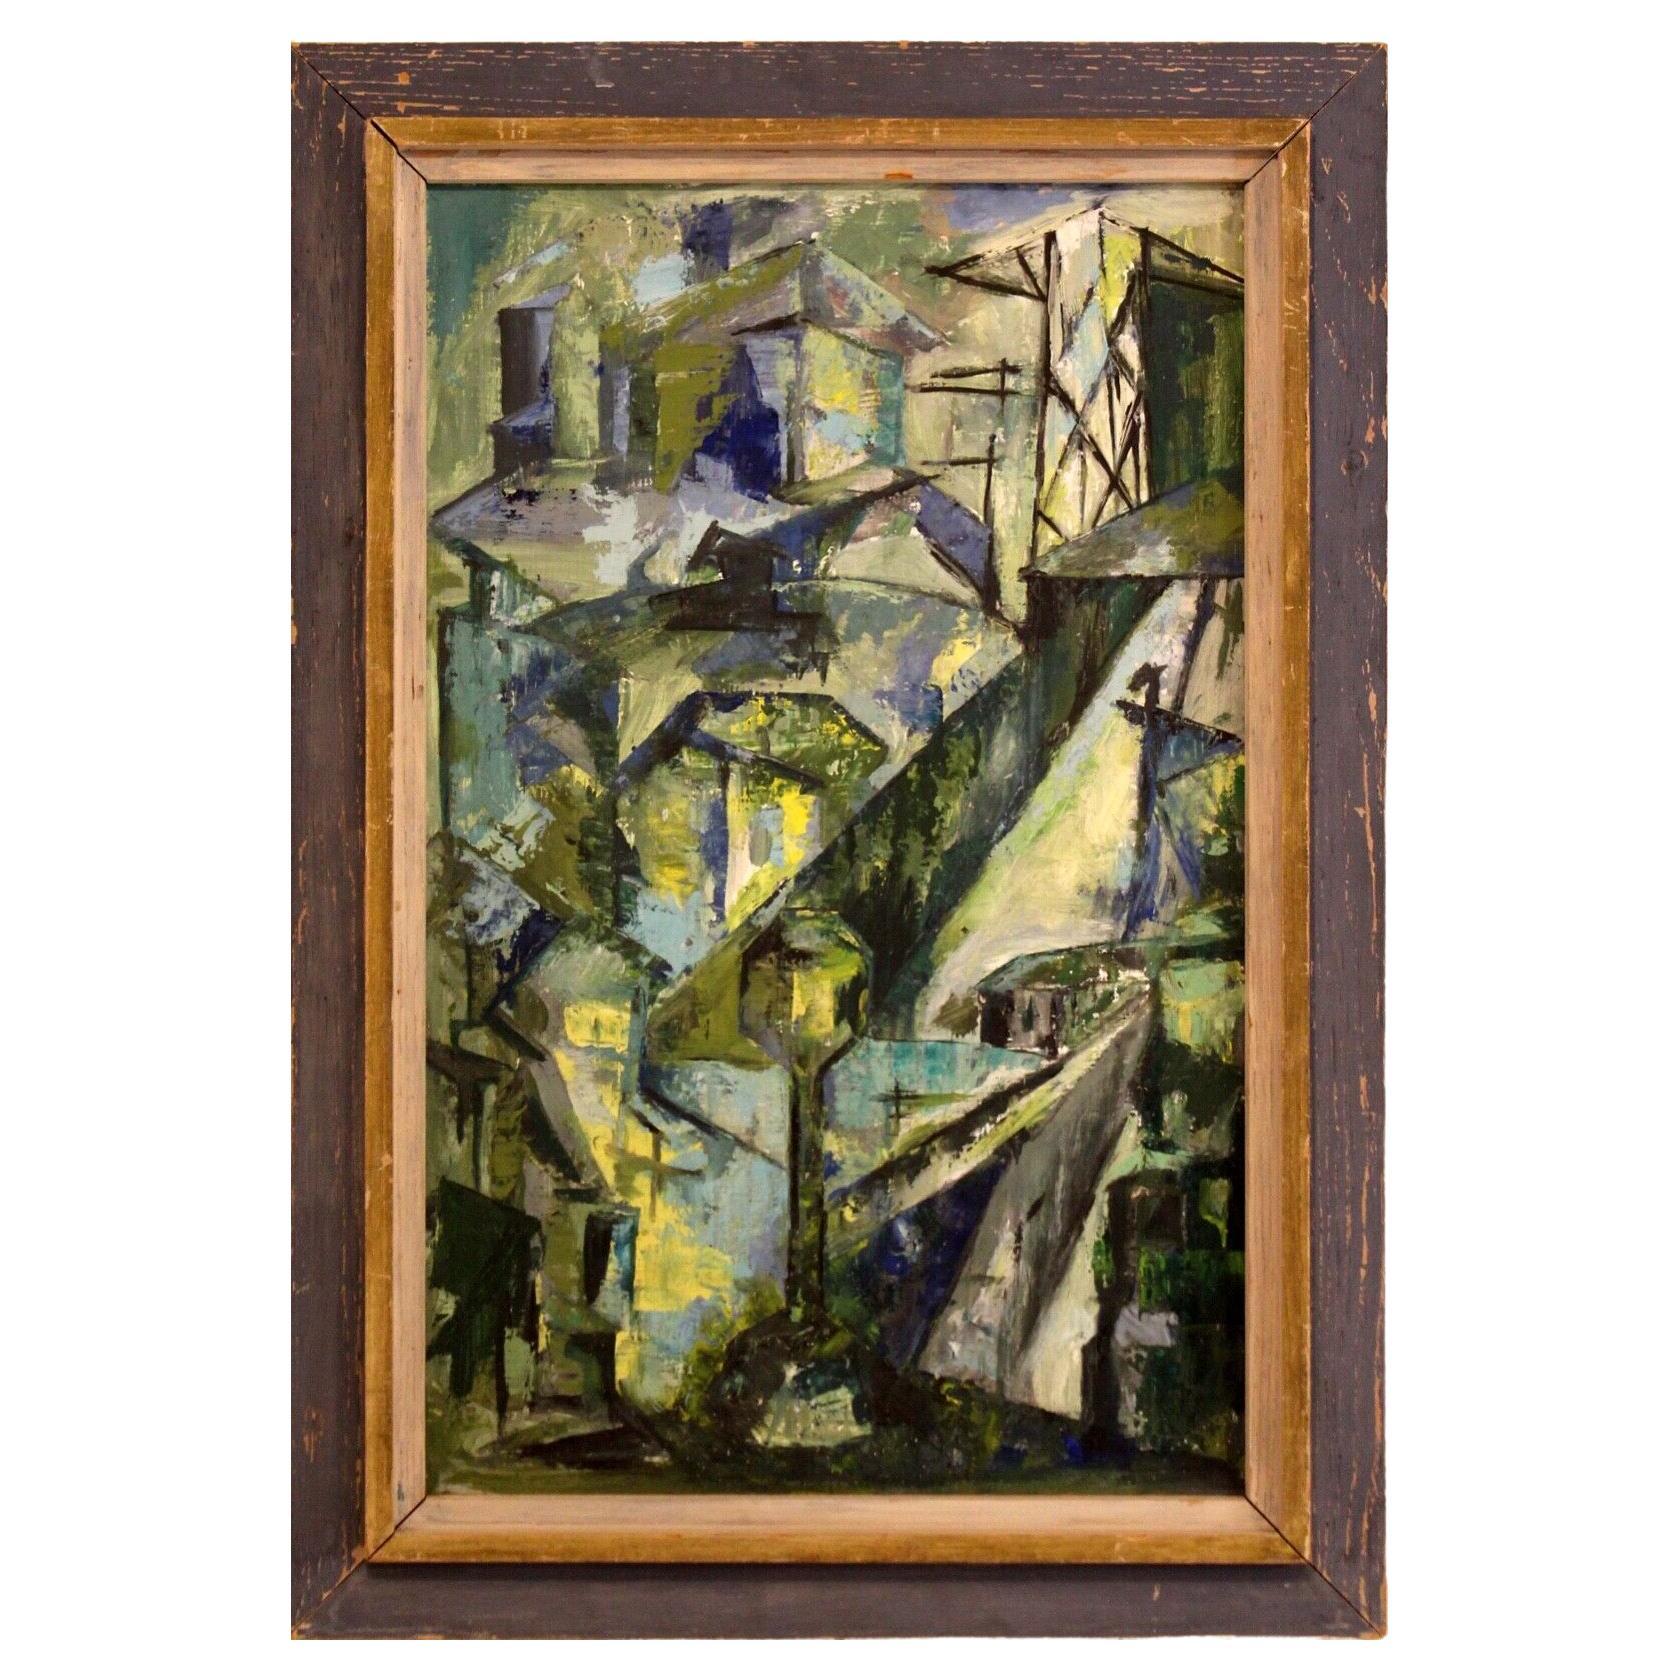 Vintage Mable Moss Mid-Century Modern Abstract Oil Painting on Canvas Framed